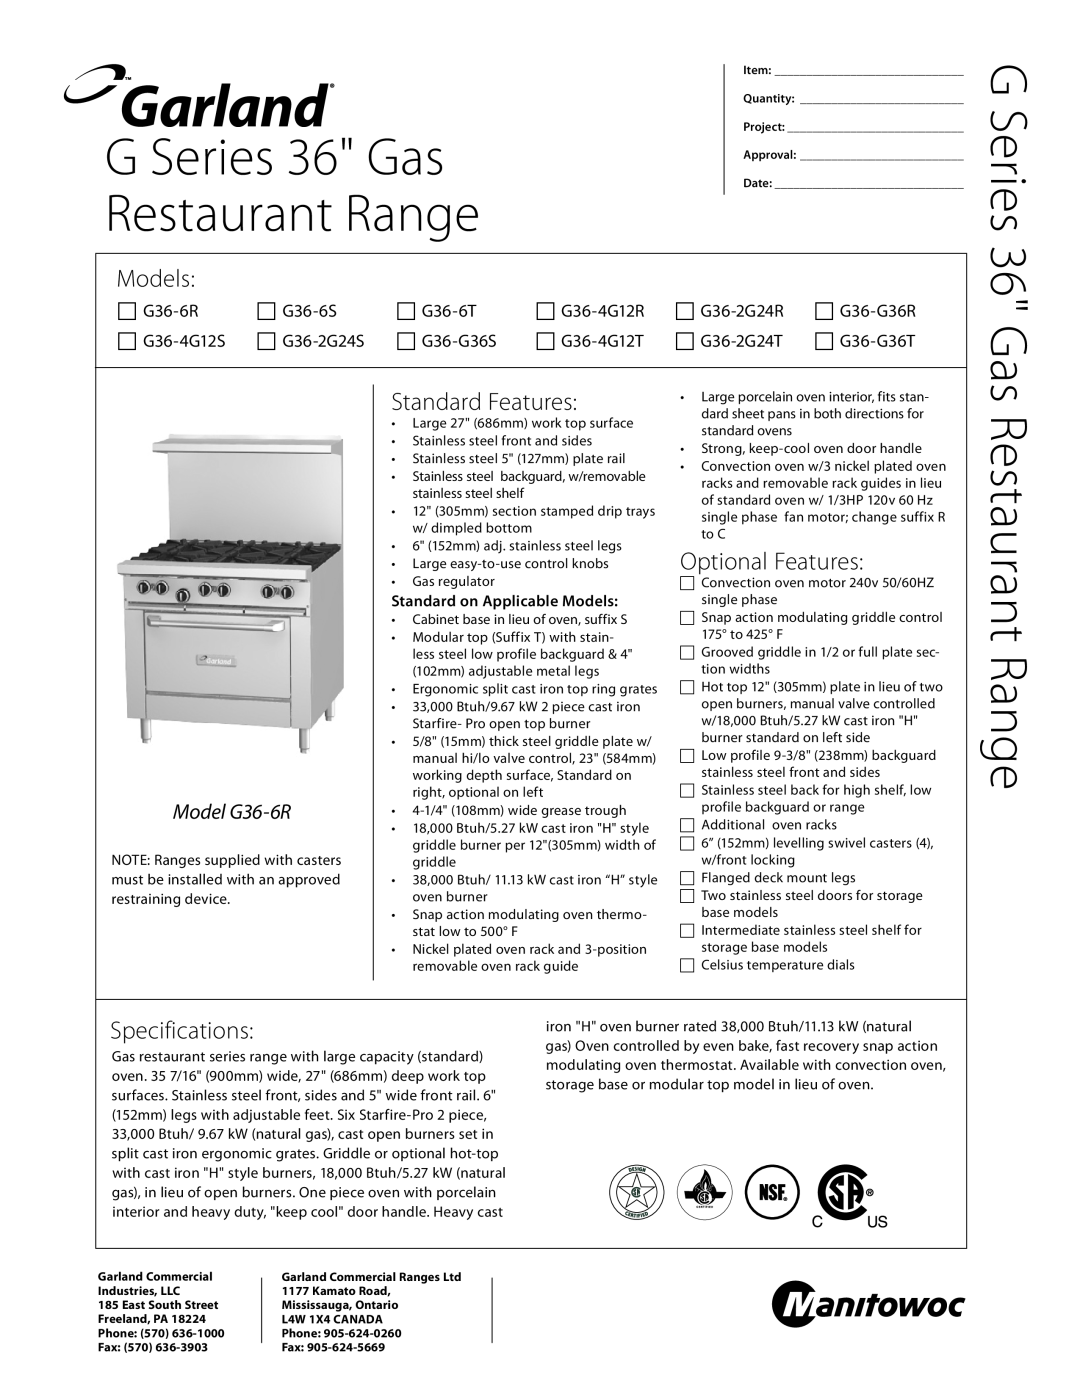 Garland G36-6S specifications Restaurant Range, G Series 36 Gas, Models, Standard Features, Optional Features,  G36-6R 